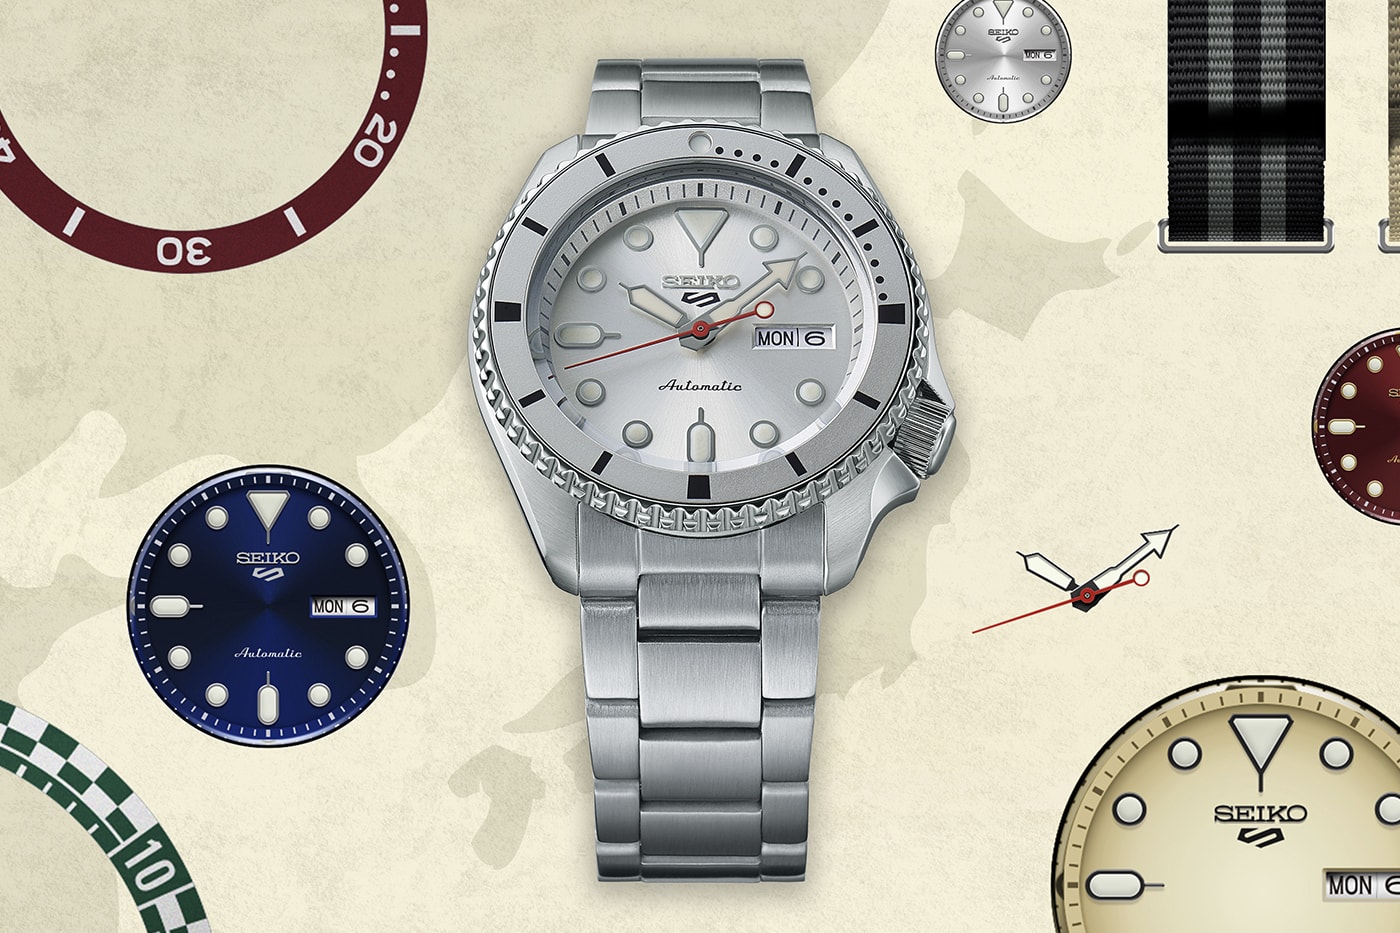 Seiko 5 Sports 'Customise' Limited Edition Info